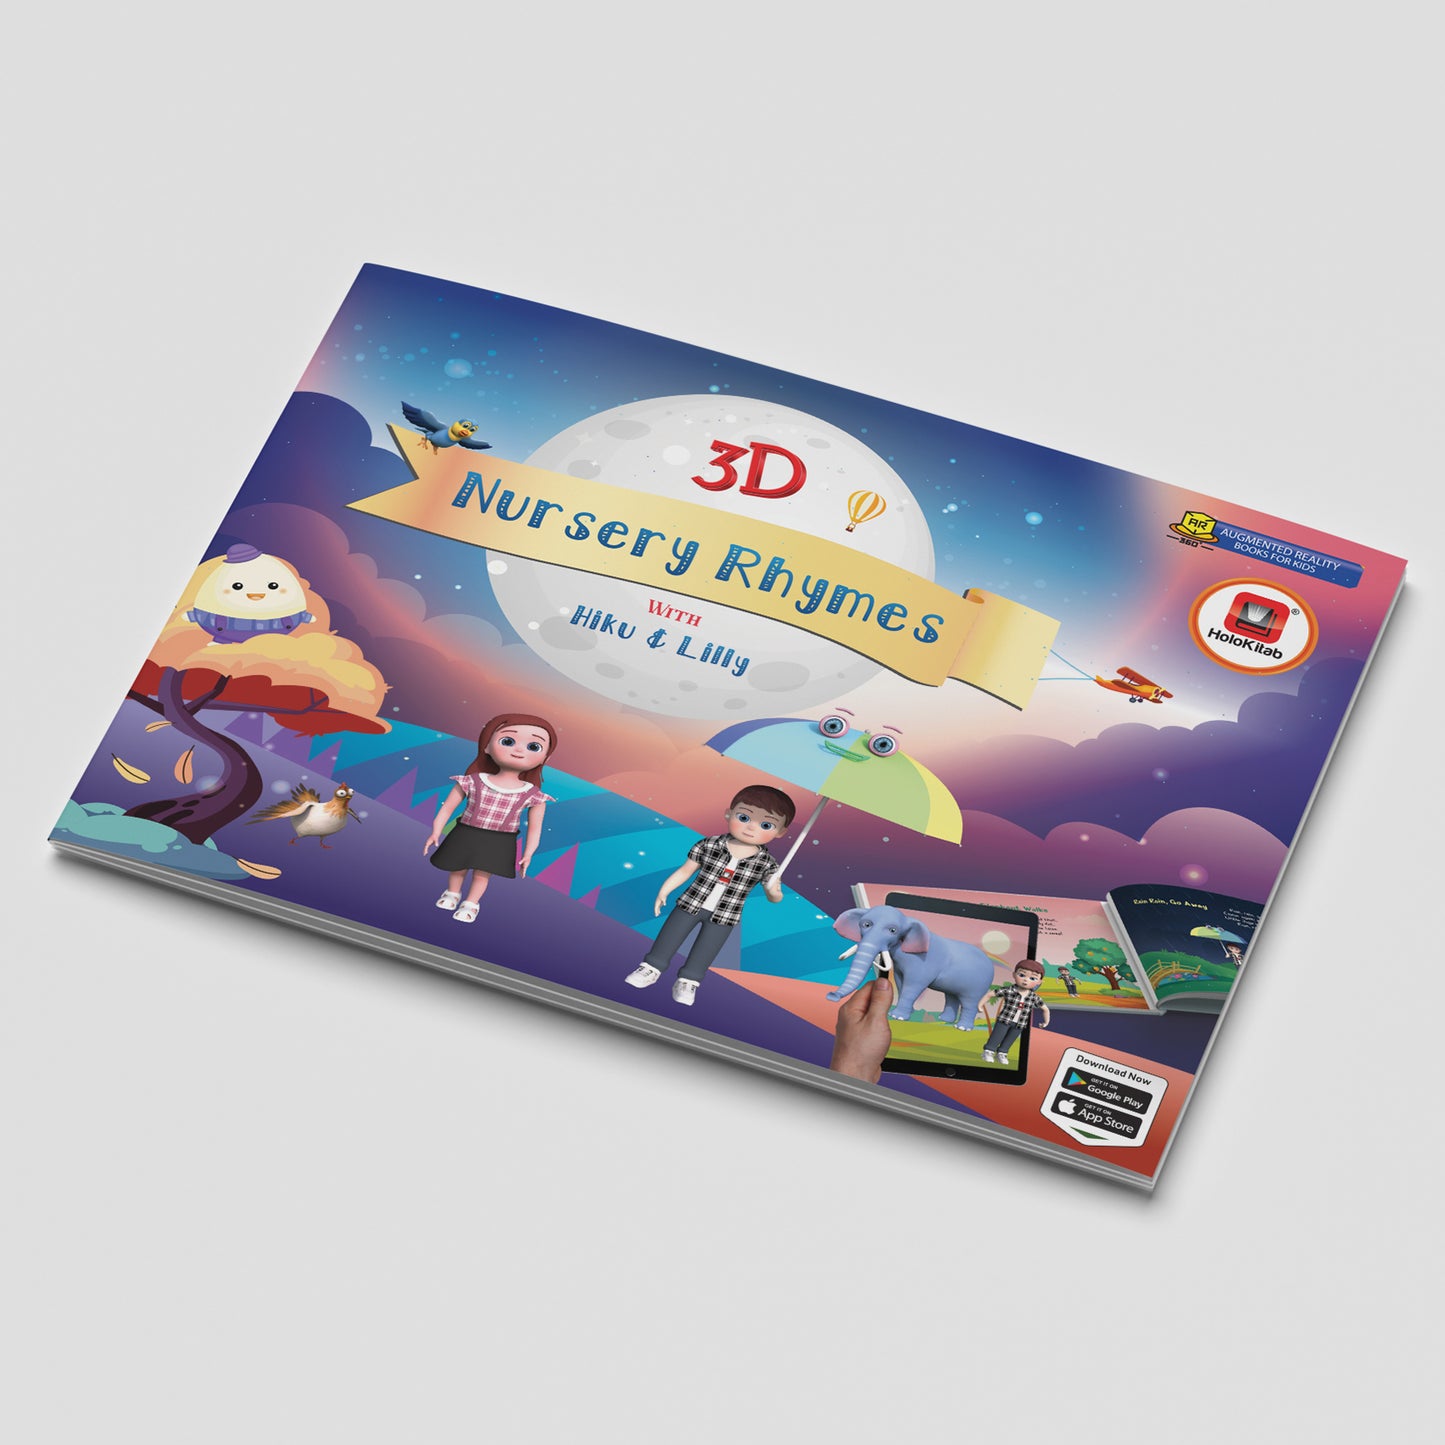 HoloKitab Augmented Reality 3D Interactive Nursery Rhymes for Kids: Enjoy 12 Delightful Rhymes in a Whole New Way!